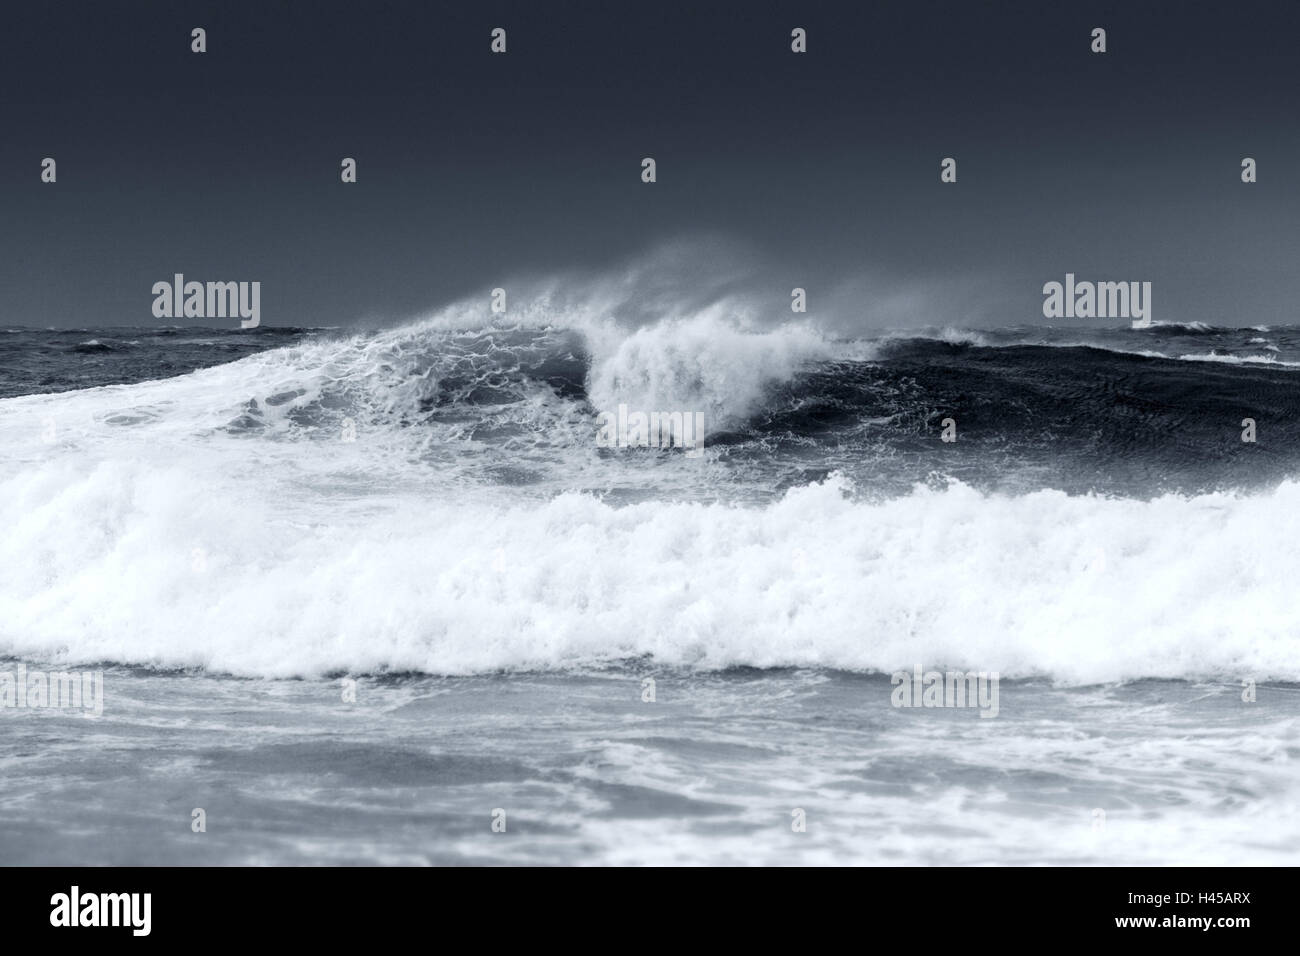 Mare, stormily, surf, Foto Stock